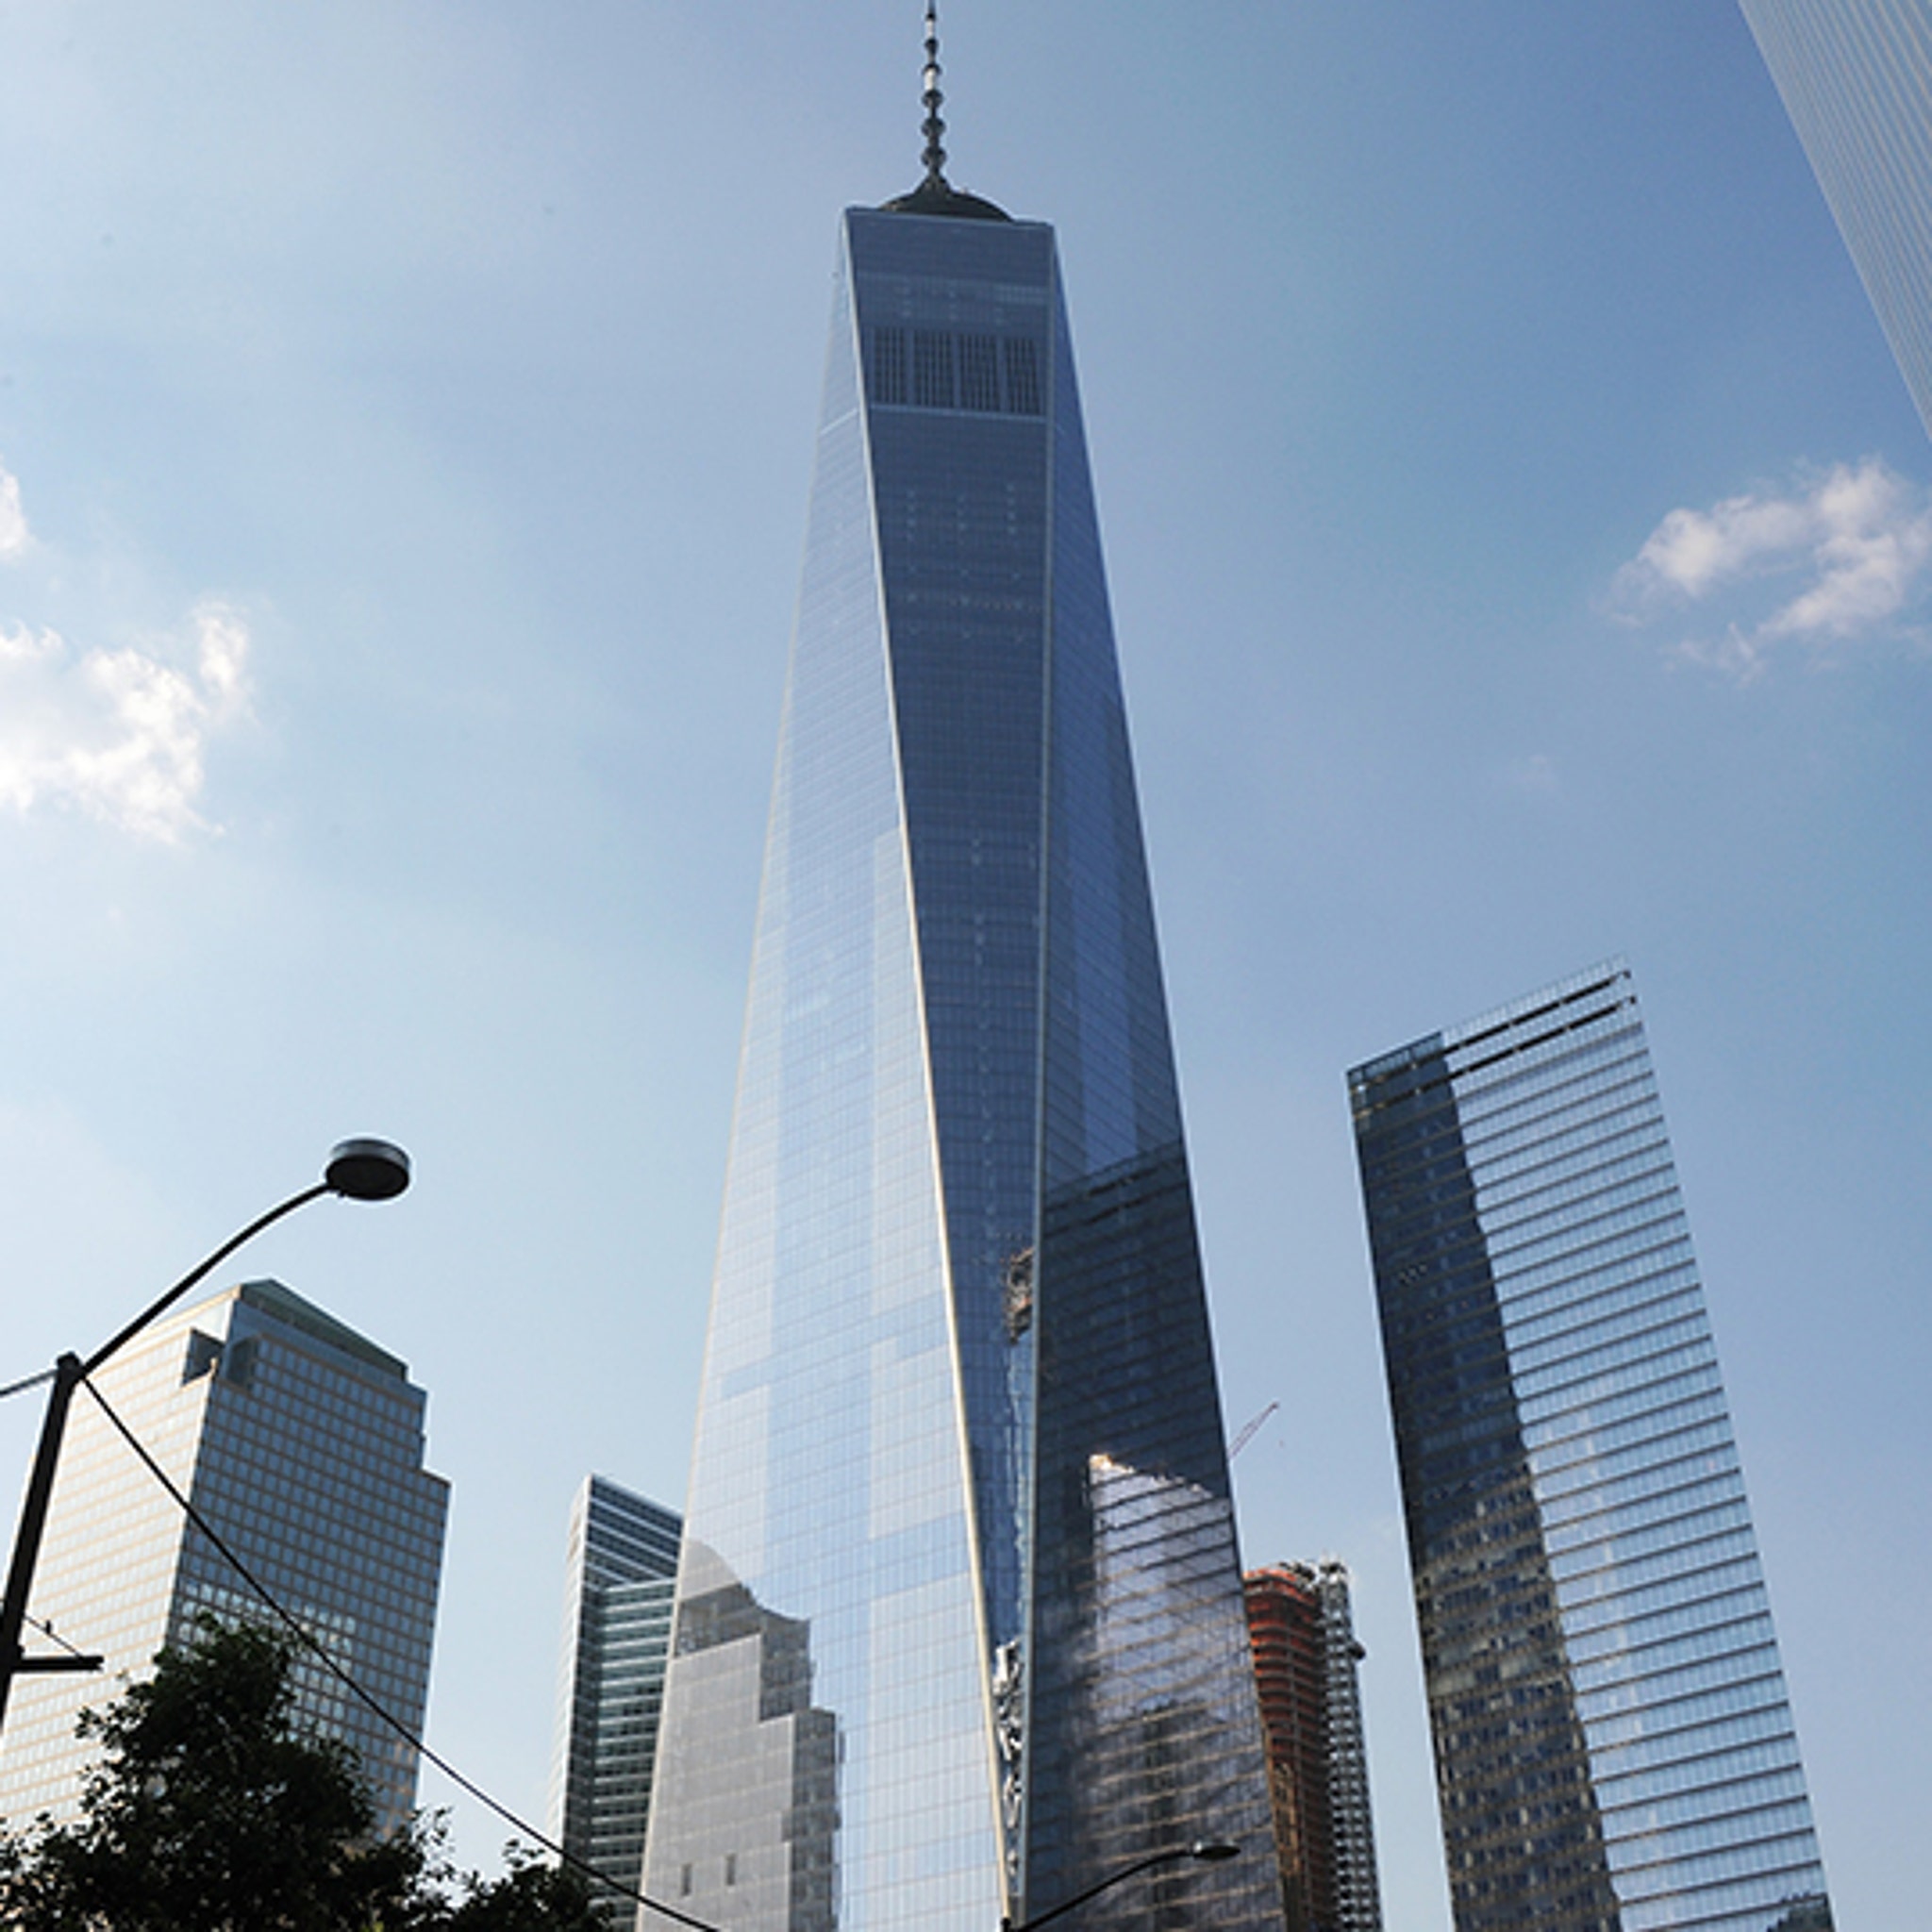 Former Chicago architecture student says firm stole One World Trade Center  design